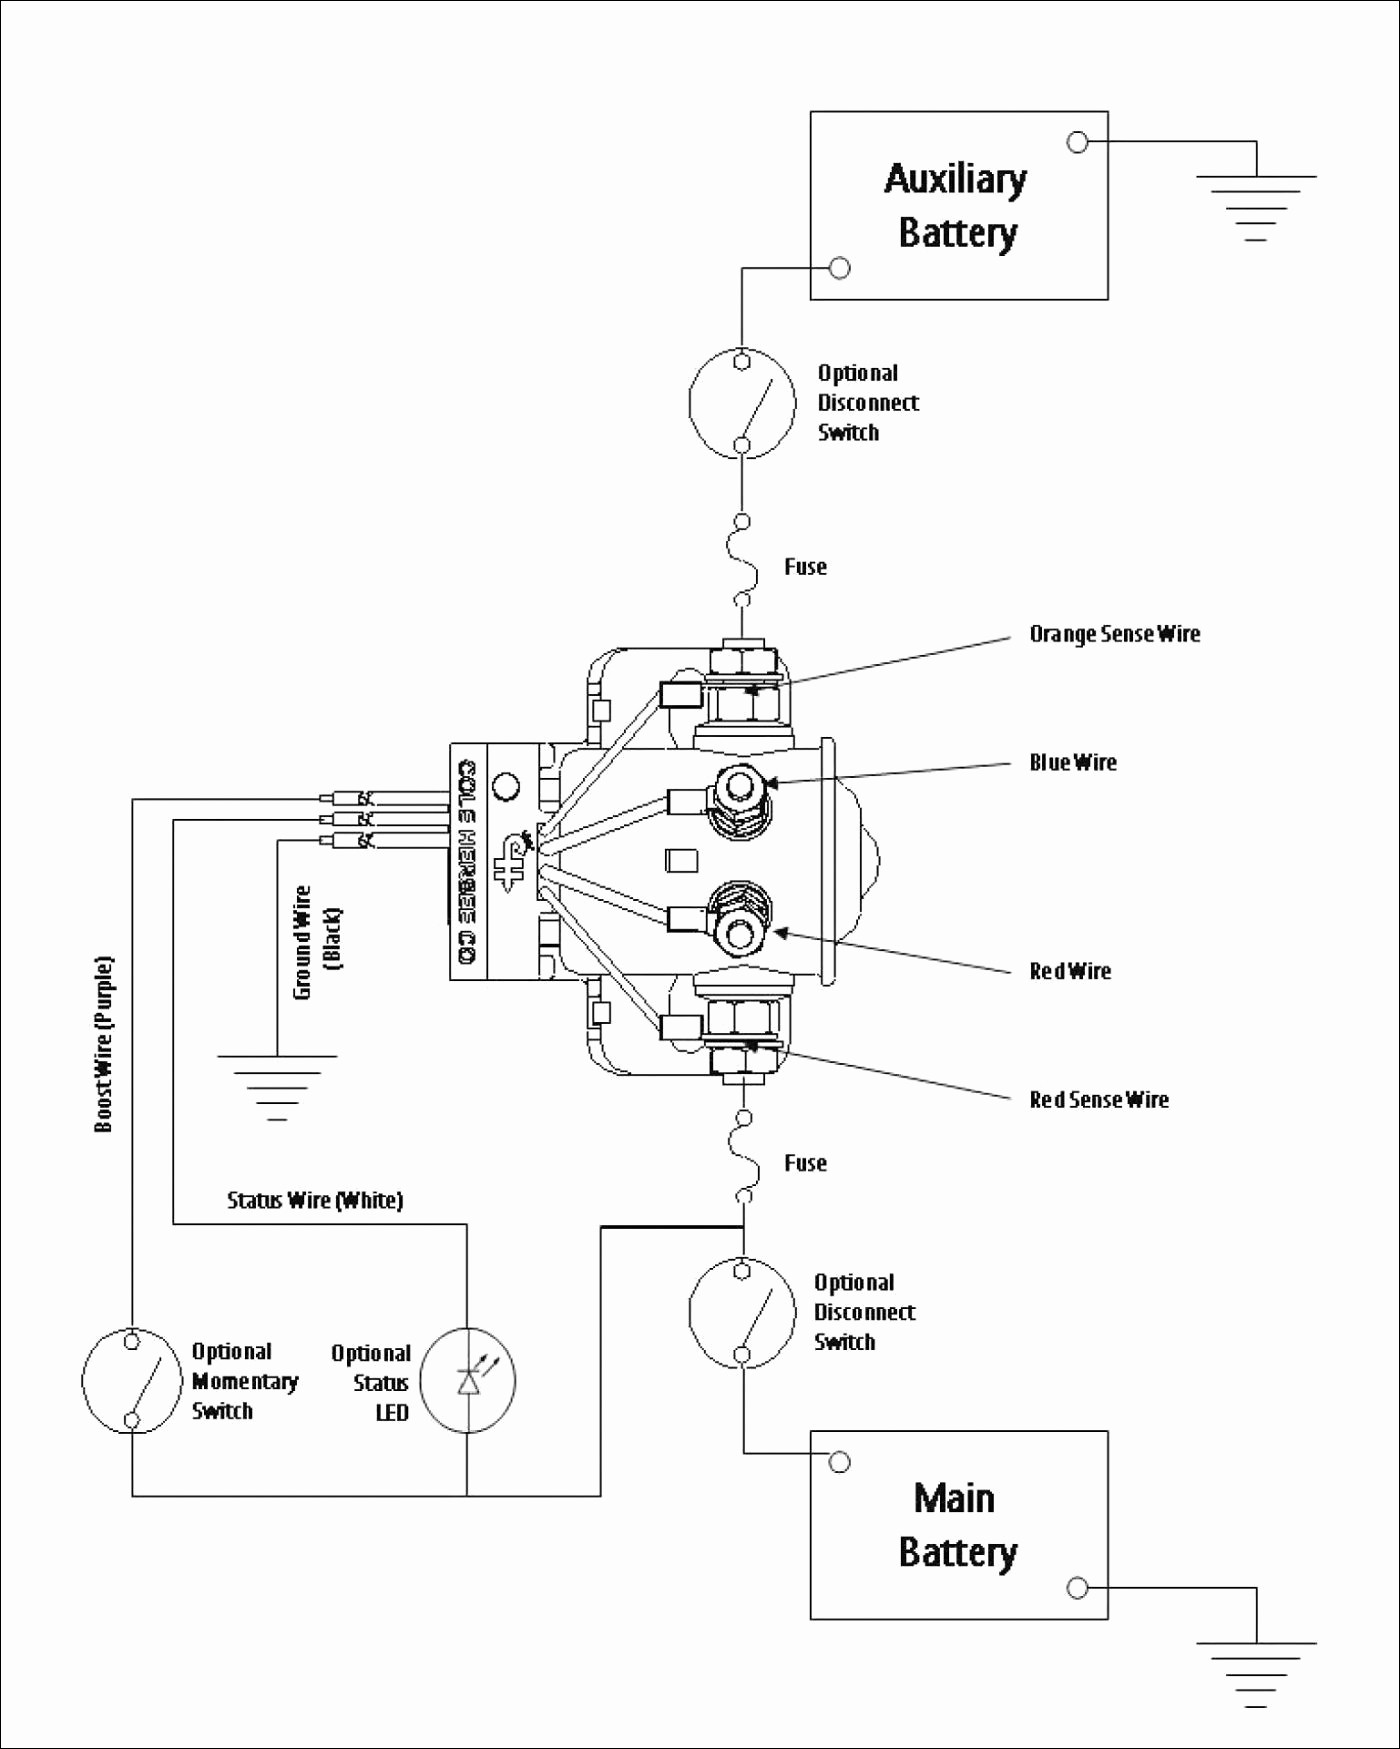 Ford solenoid Wiring Diagram New Chevy Impala Wiring Diagram Also ford Mustang Starter solenoid Ford